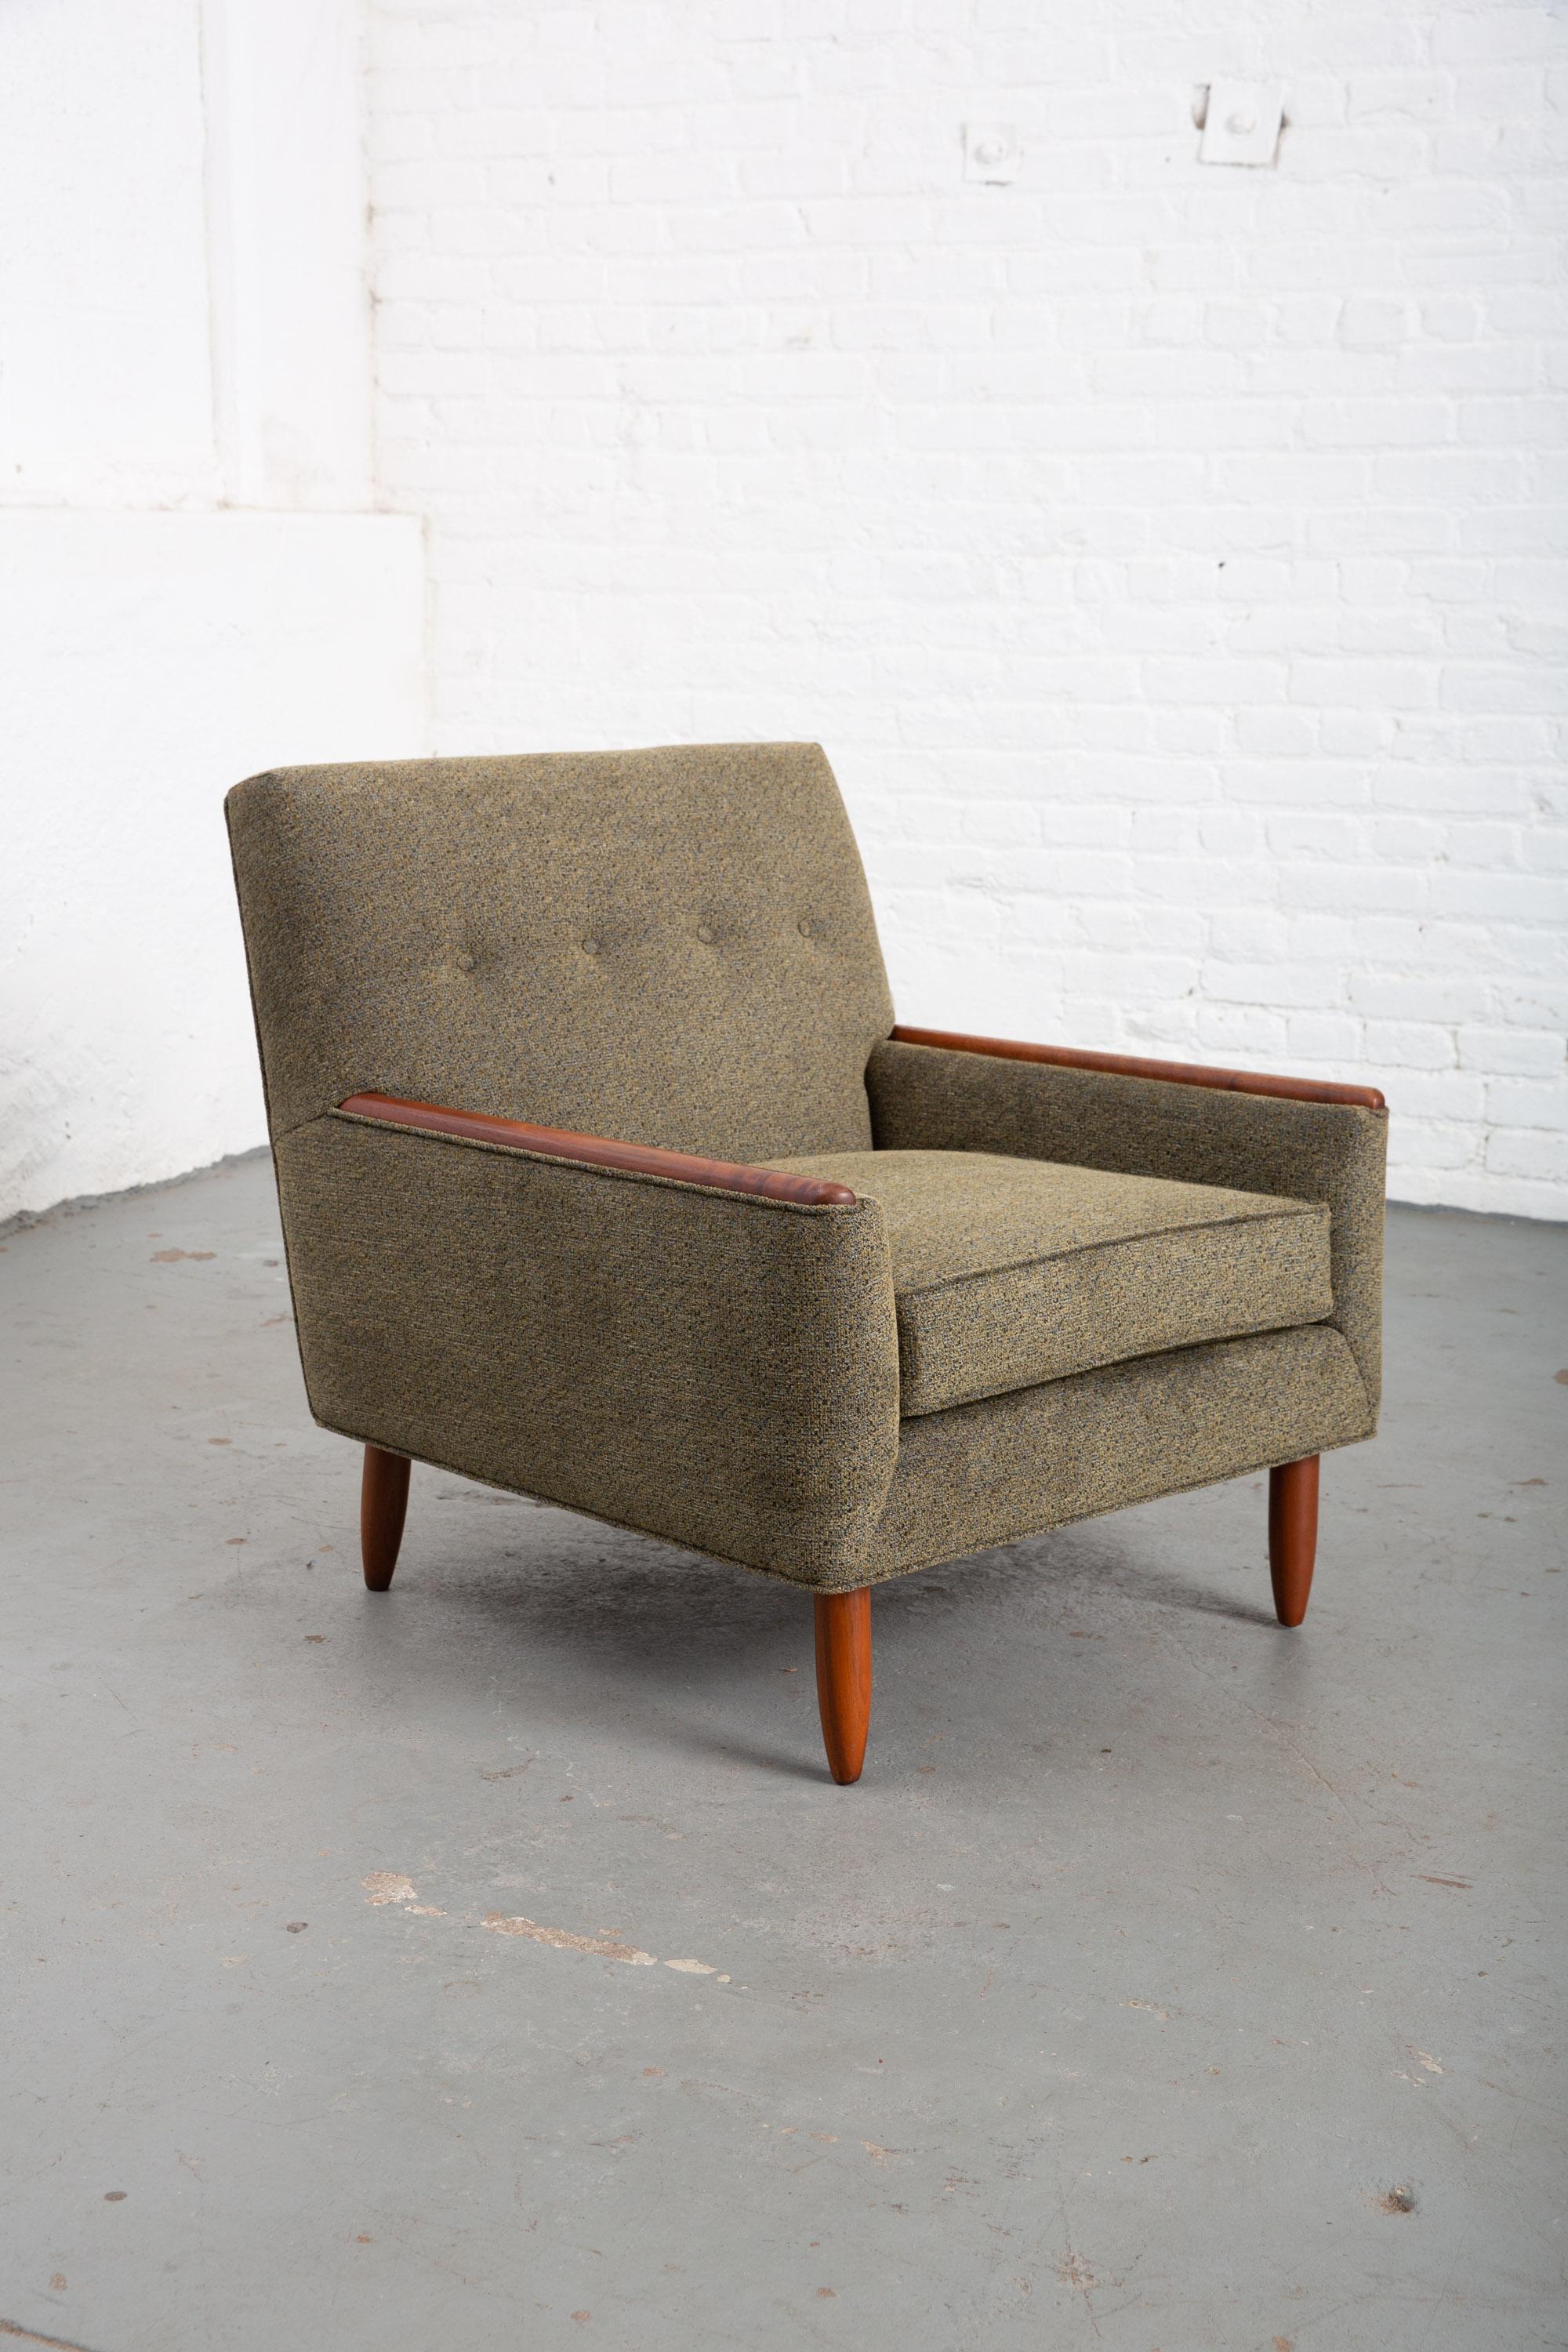 American Pair of Newly Upholstered Mid-Century Modern Armchairs